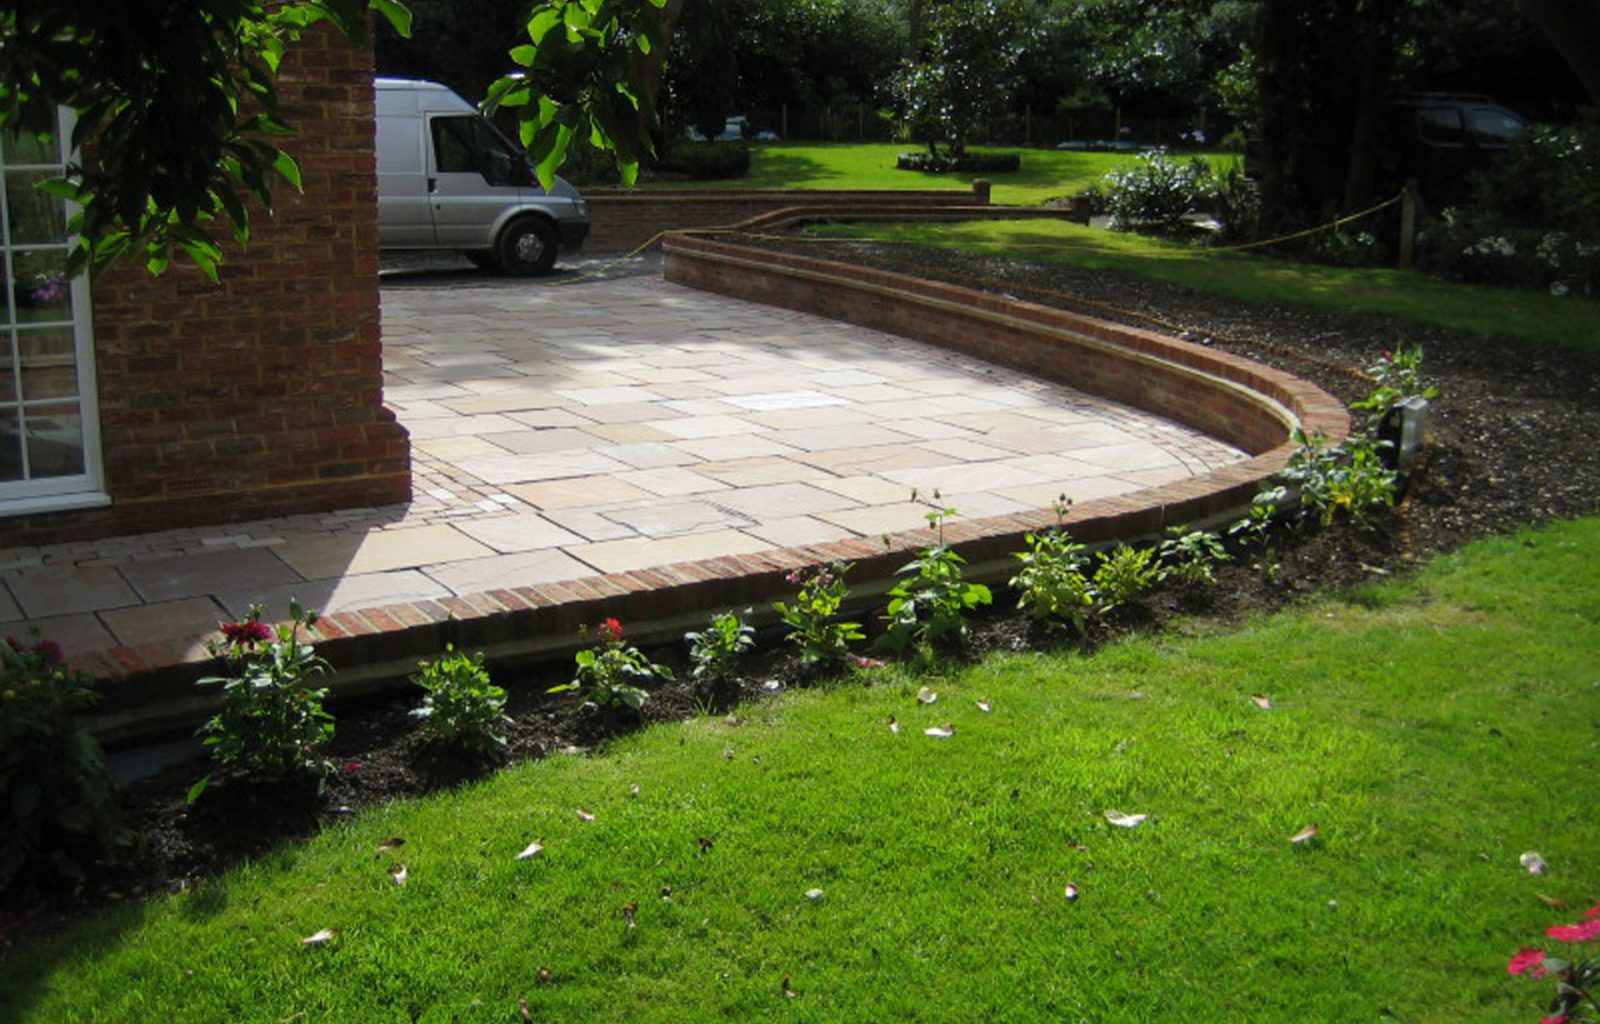 A large sunken patio area surrounding a brick house, with walled edging, lawn and planted border